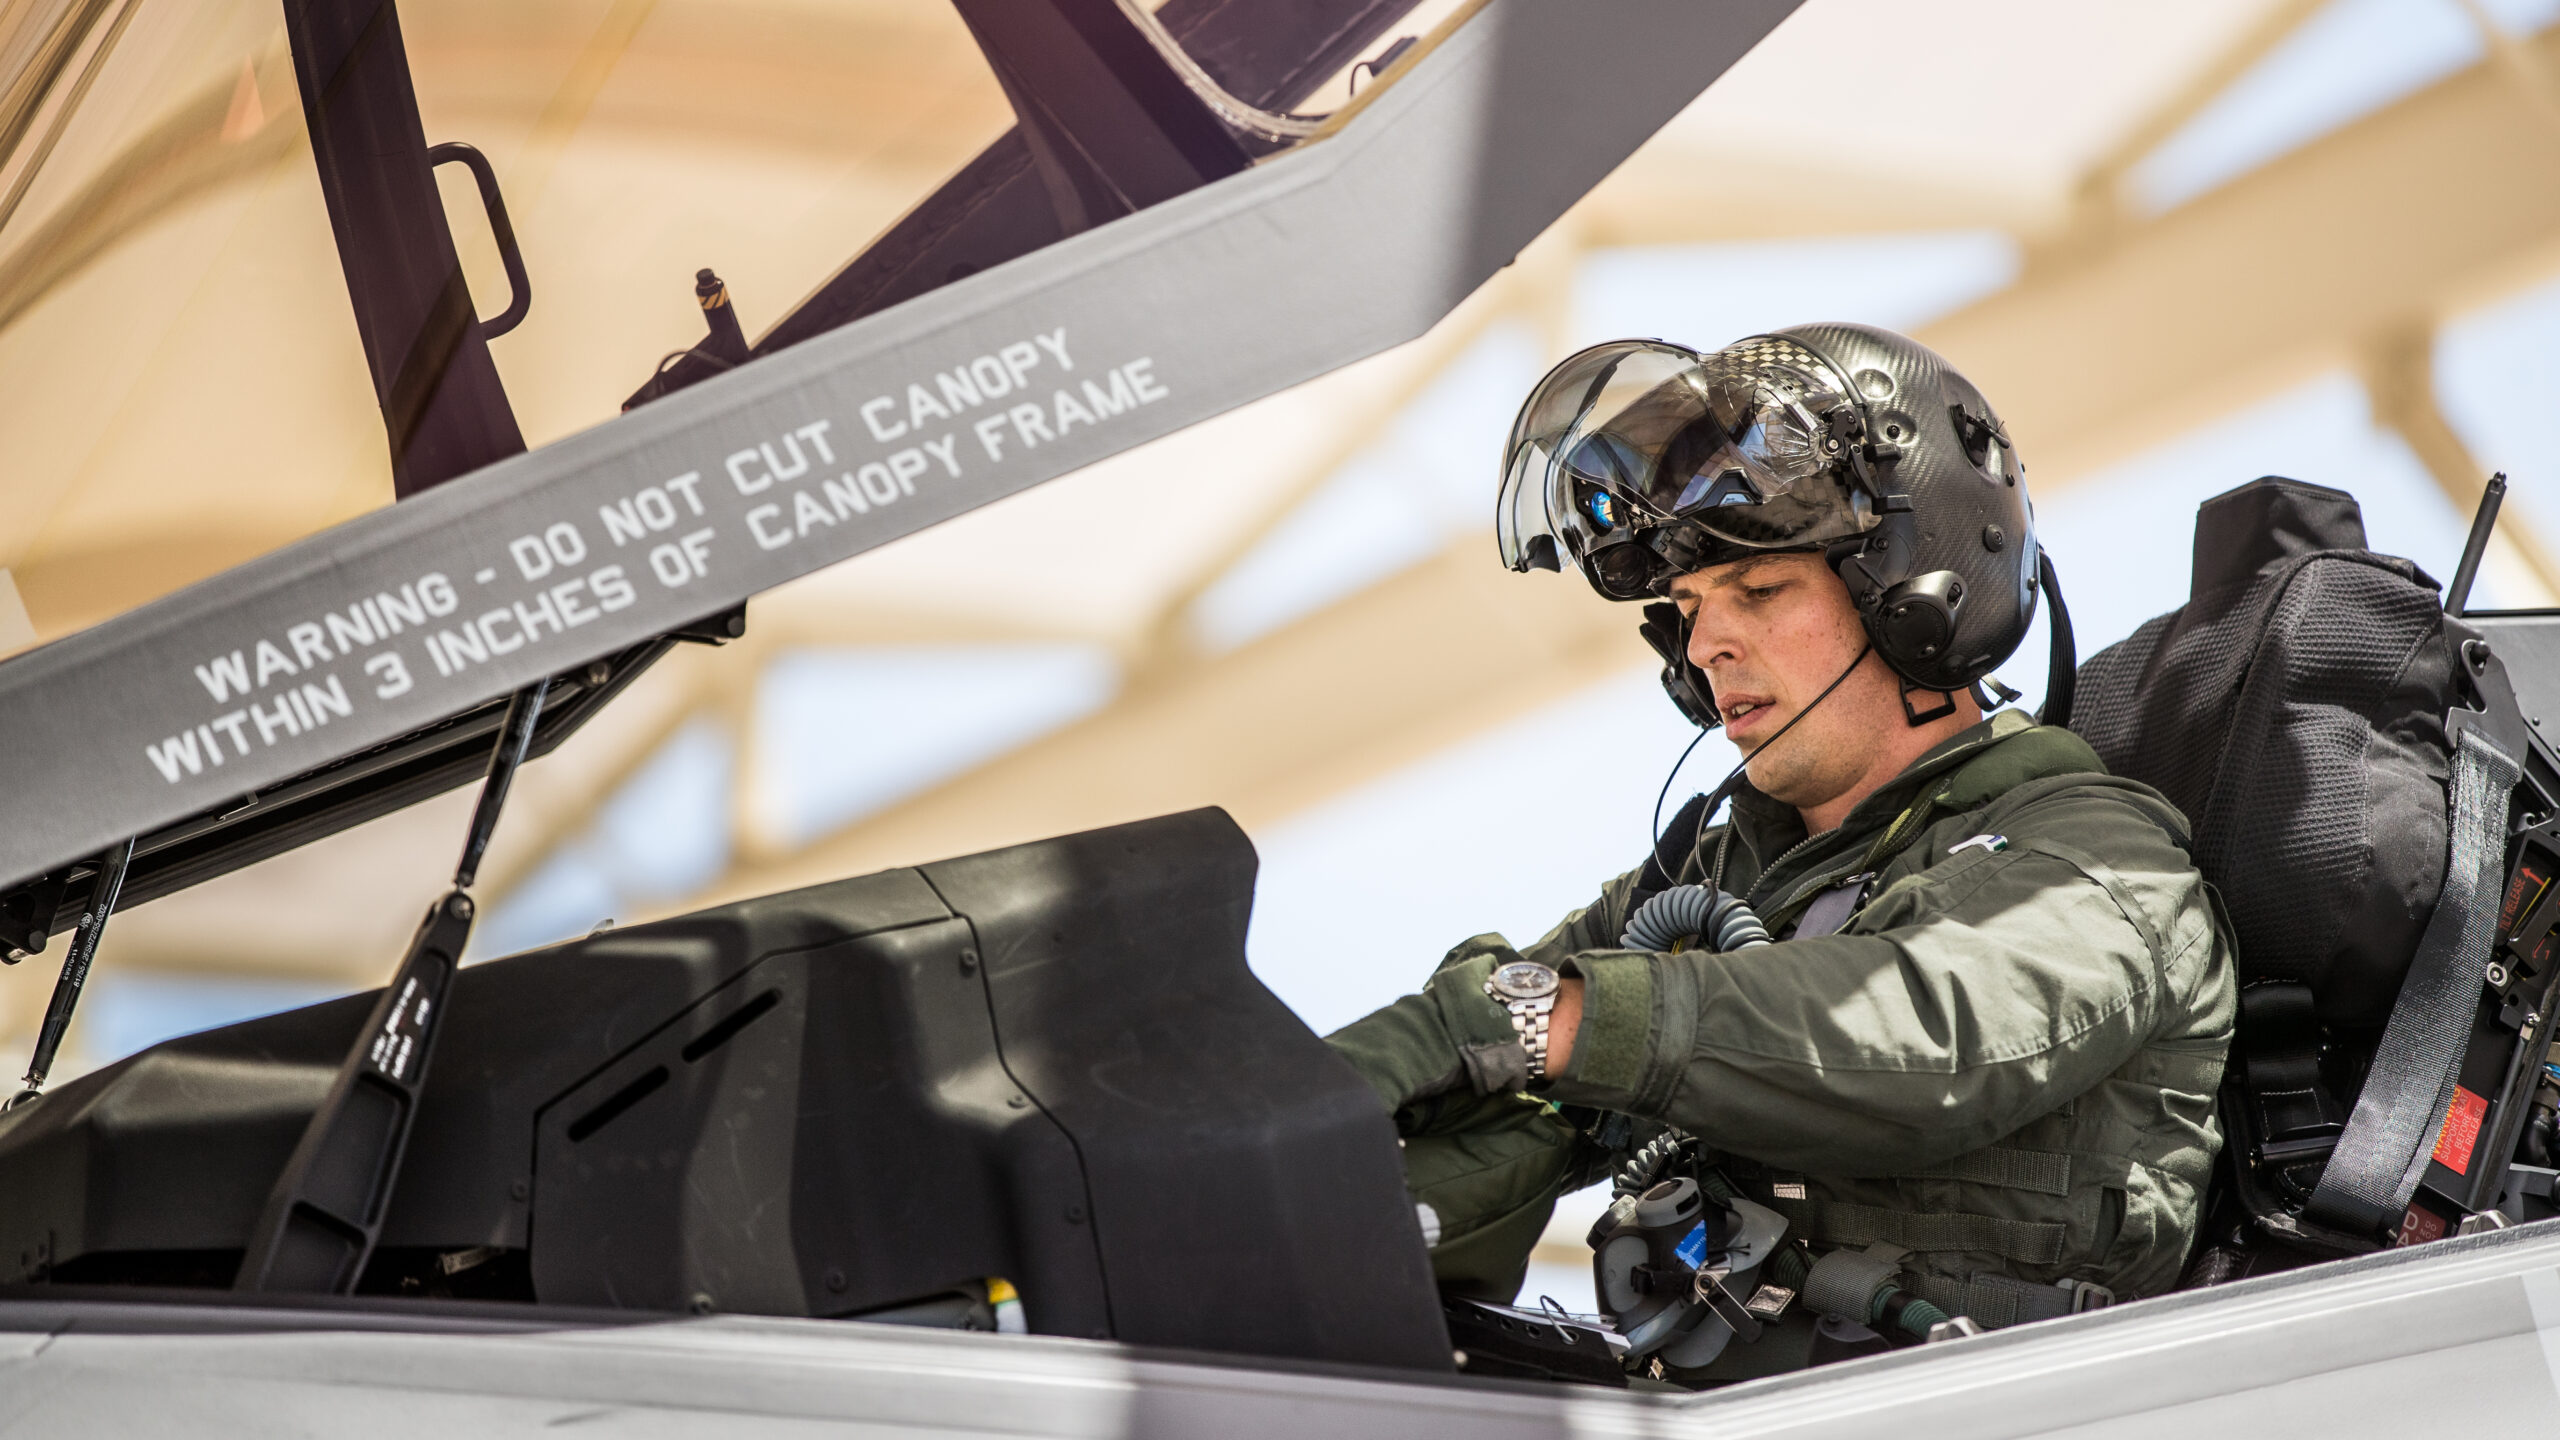 The World’s Greatest Flight Simulator Is for F-35 Pilots Only